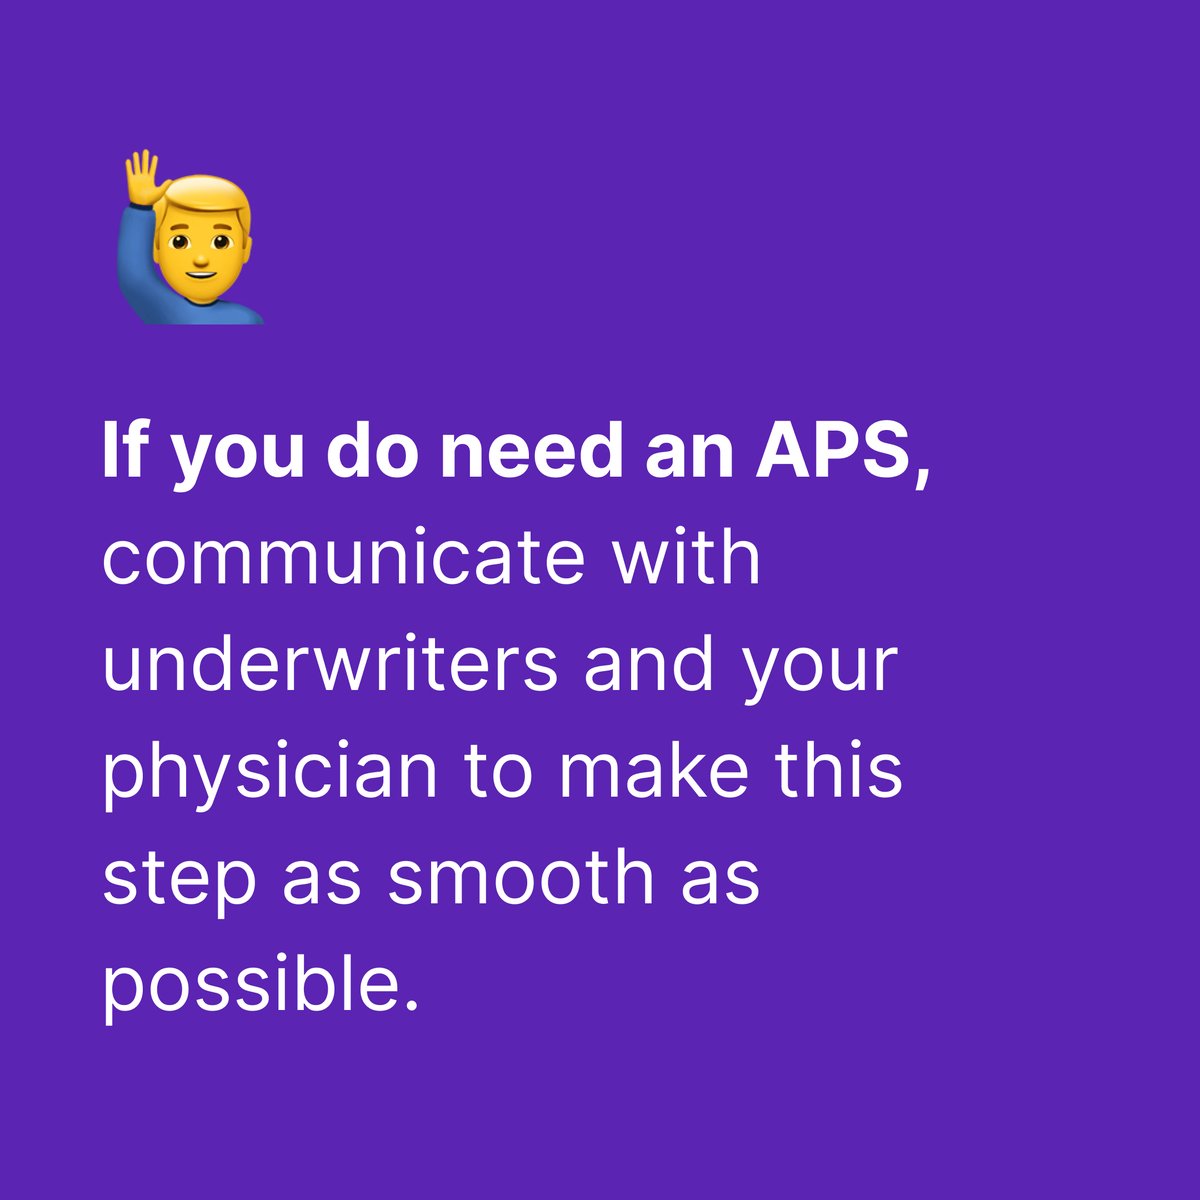 An APS, or attending physician statement, if one of those things that some life insurance companies might ask for. It's not common, but if you do need one, our blog post will help you through the process. meetfabric.com/blog/will-i-ne…